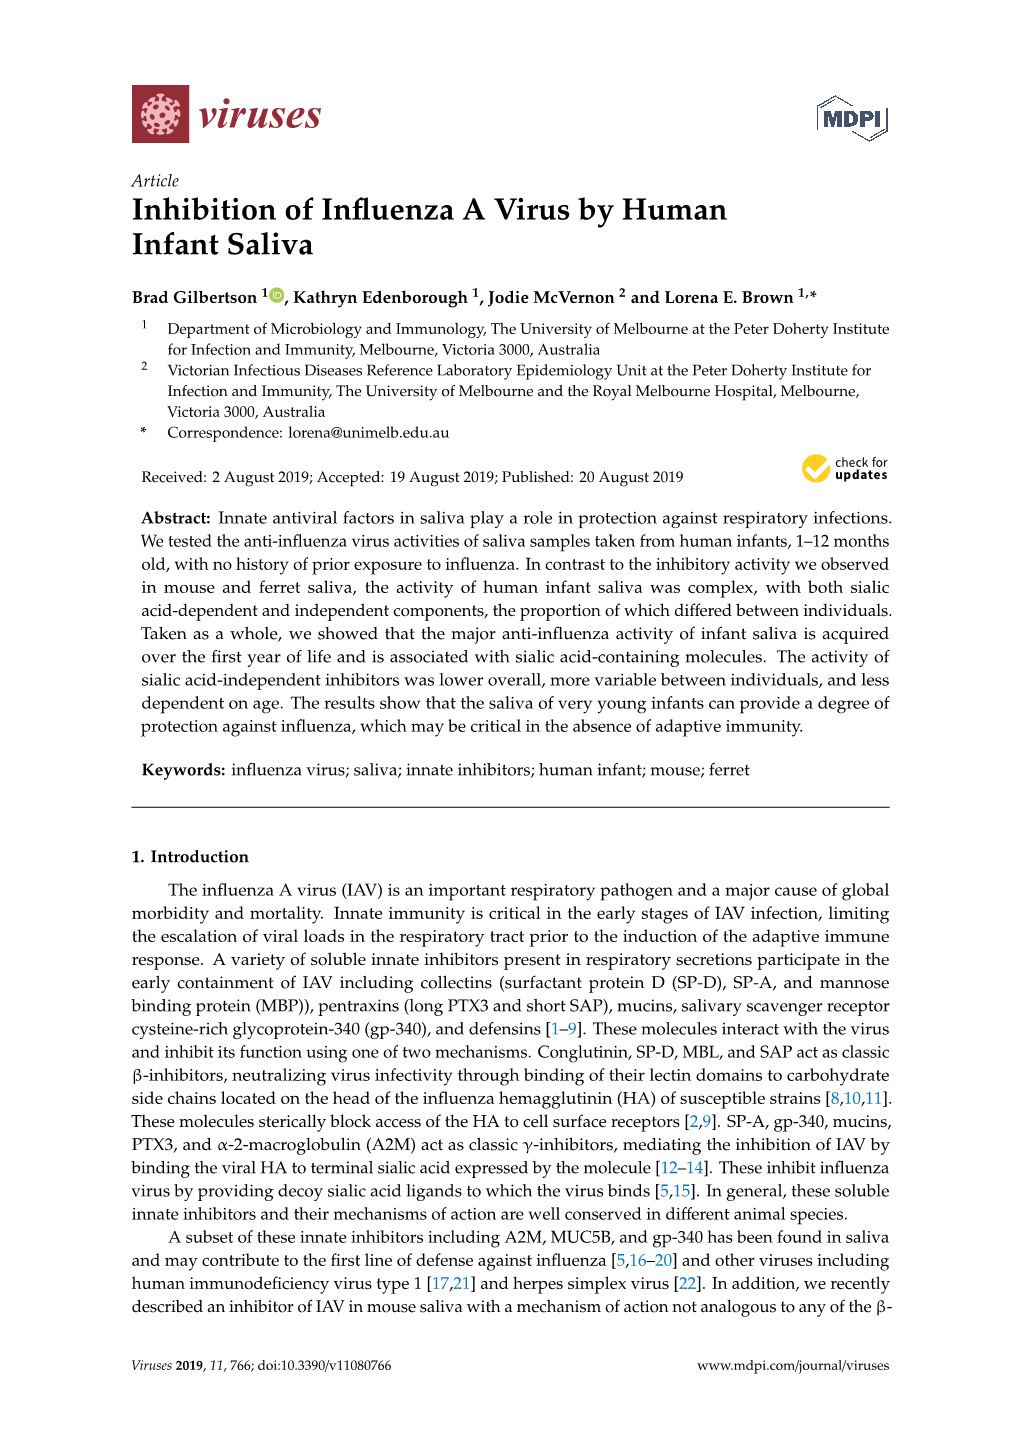 Inhibition of Influenza a Virus by Human Infant Saliva